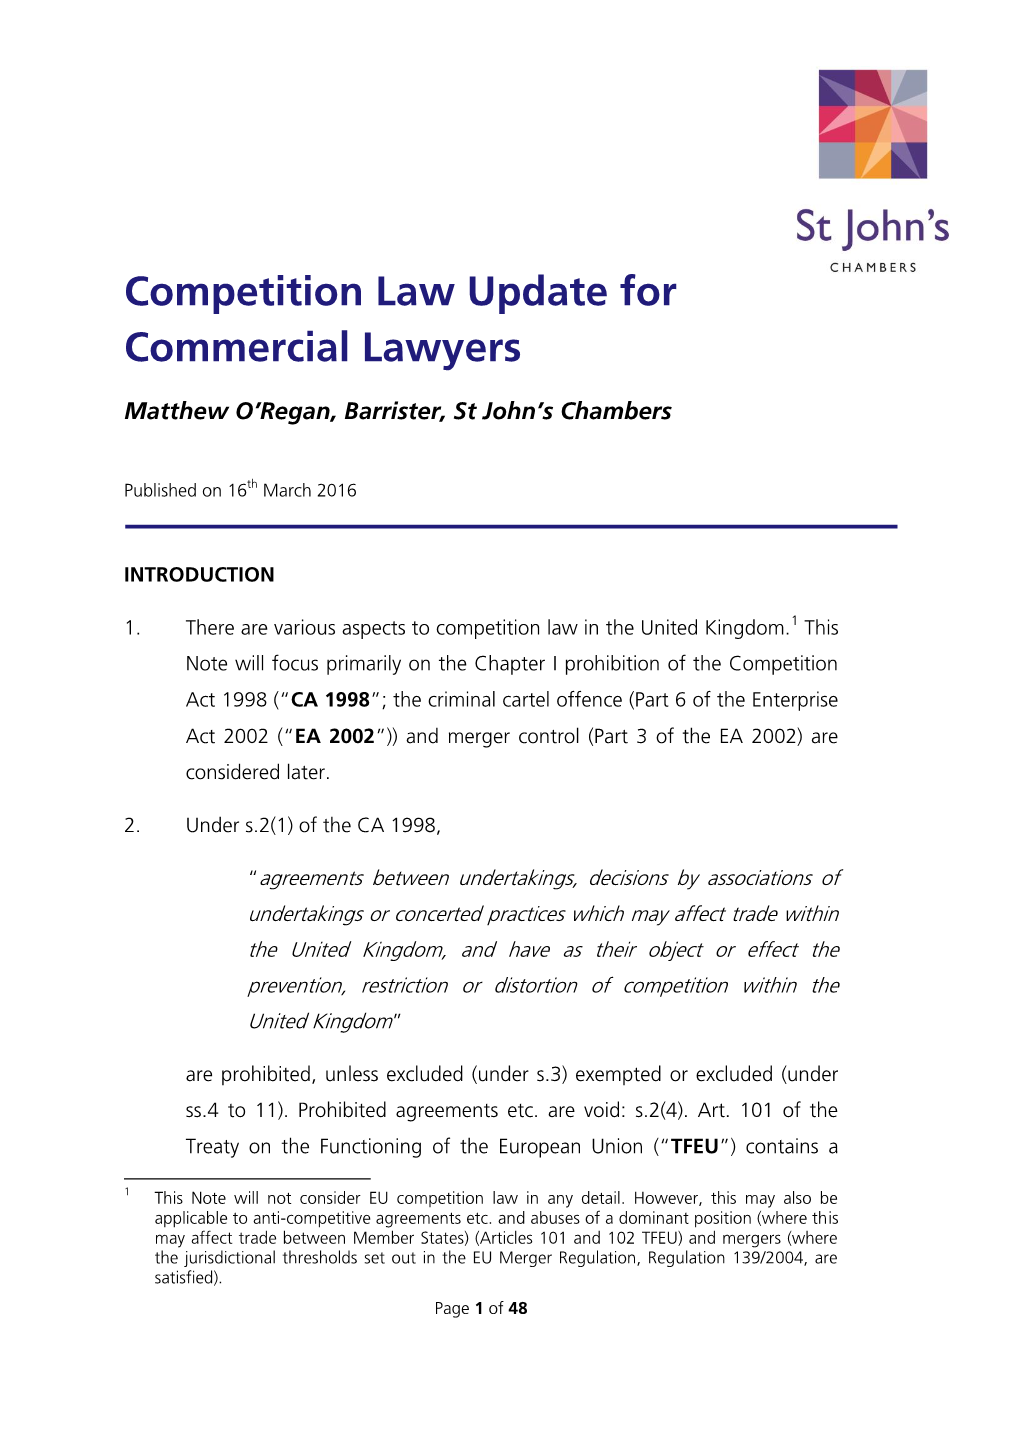 Competition Law Update for Commercial Lawyers